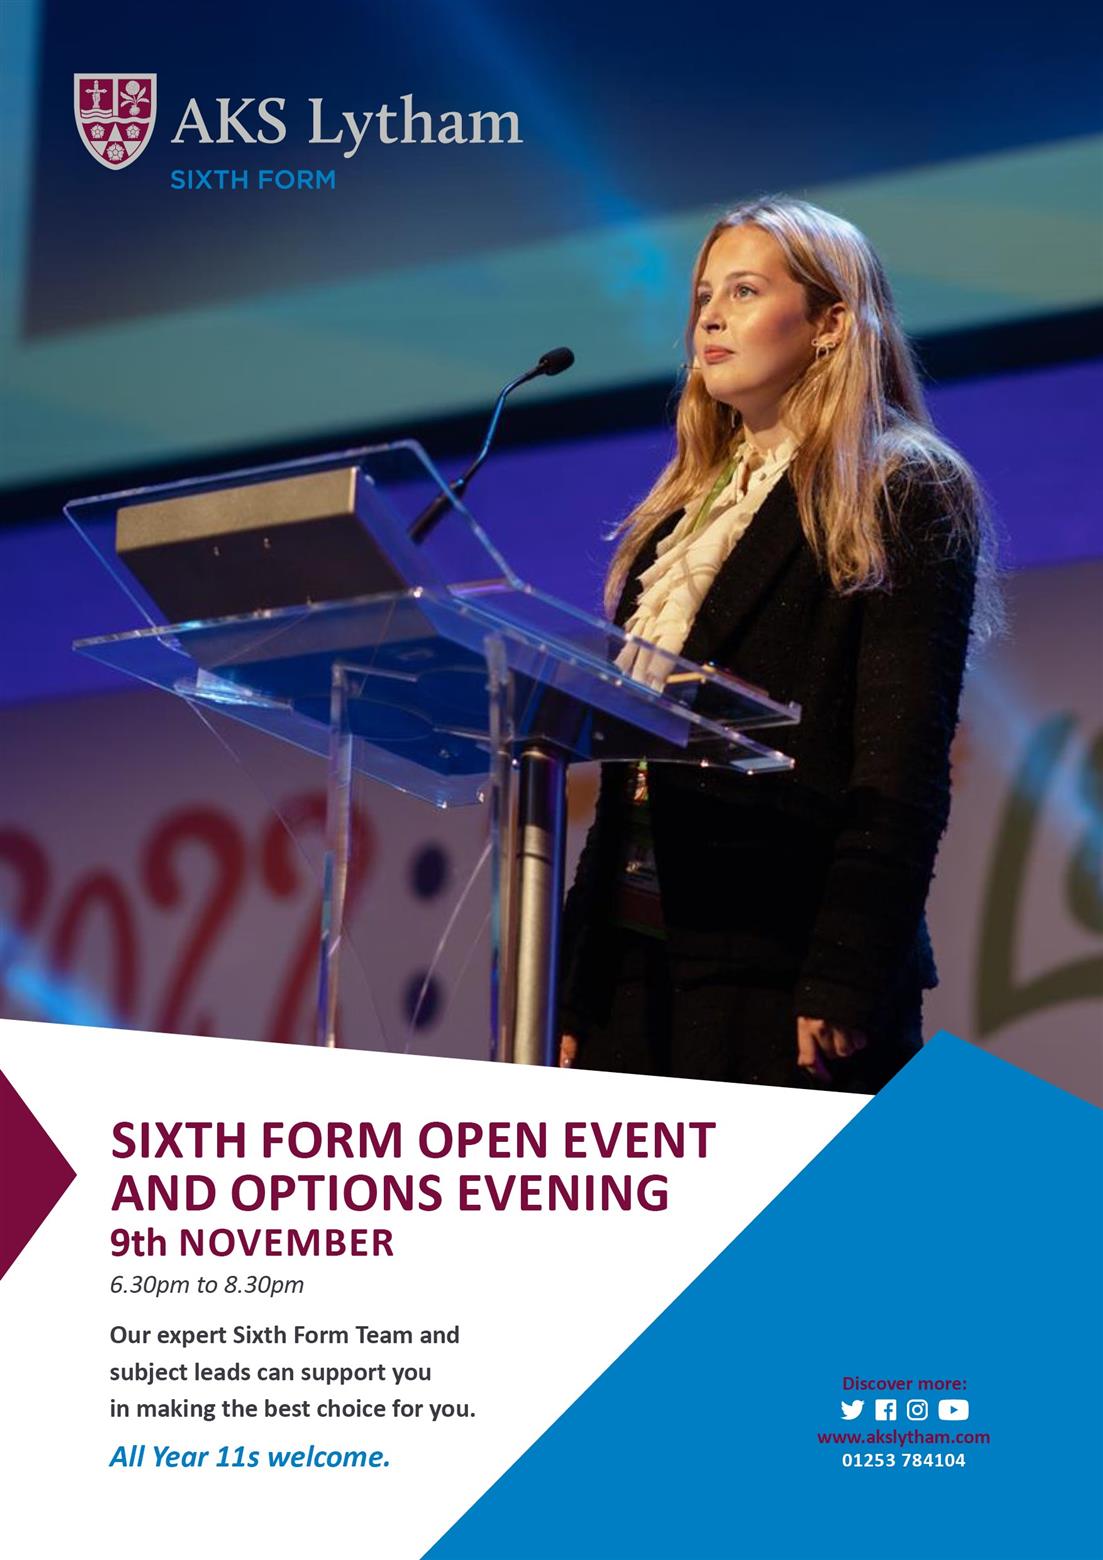 Sixth Form Open Event and Options Evening - Thursday 9th November